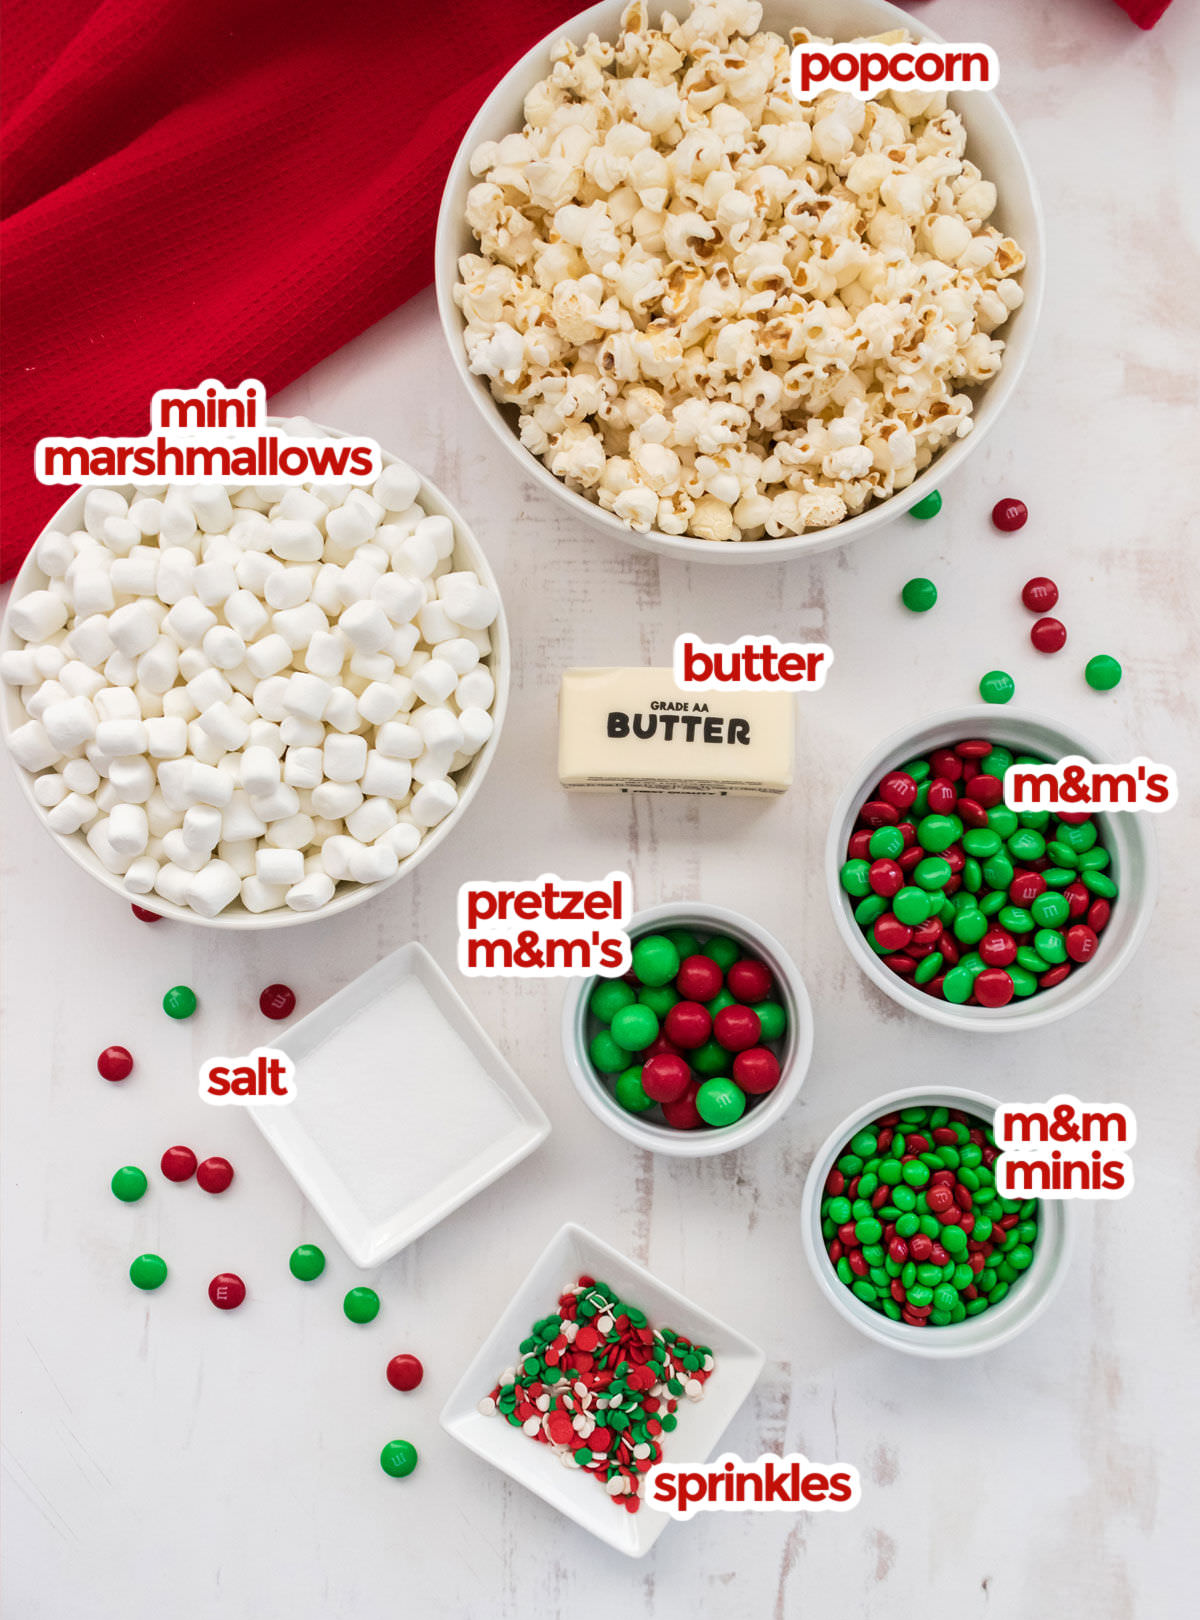 All the ingredients you will need to make Santa Crunch Popcorn including popcorn, mini marshmallows, butter, salt, sprinkles and various types of Red and Green M&M's.